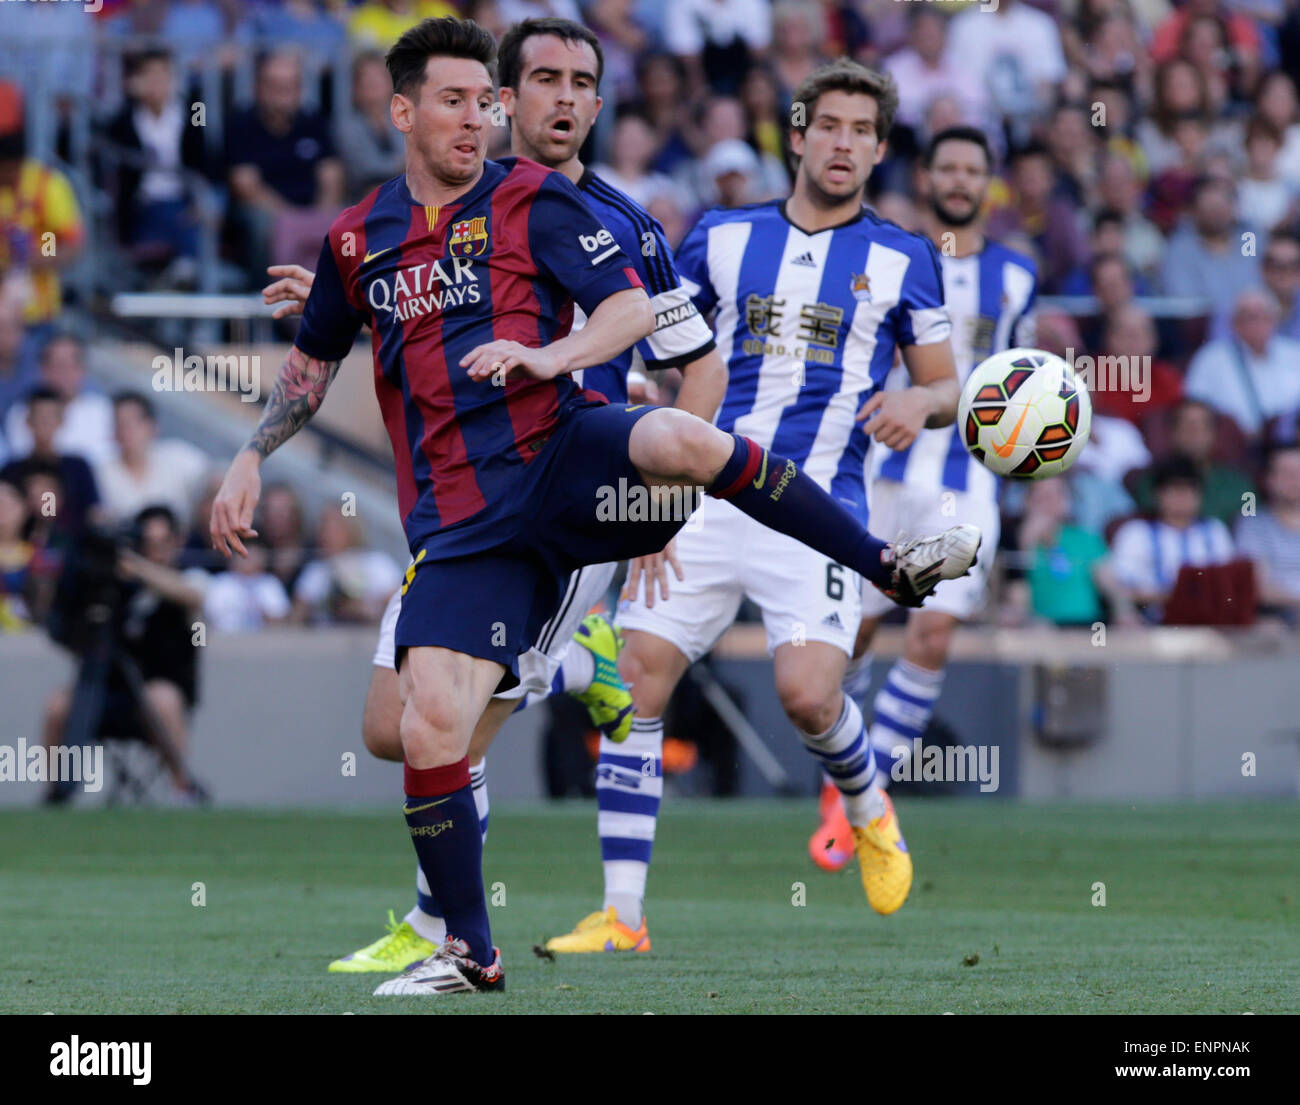 Barcelona, Spain. 9th May, 2015. FC Barcelona's Lionel Messi (L) competes during the La Liga soccer match against Real Sociedad at Camp Nou Stadium in Barcelona, Spain, May 9, 2015. FC Barcelona won 2-0. Credit:  Pau Barrena/Xinhua/Alamy Live News Stock Photo